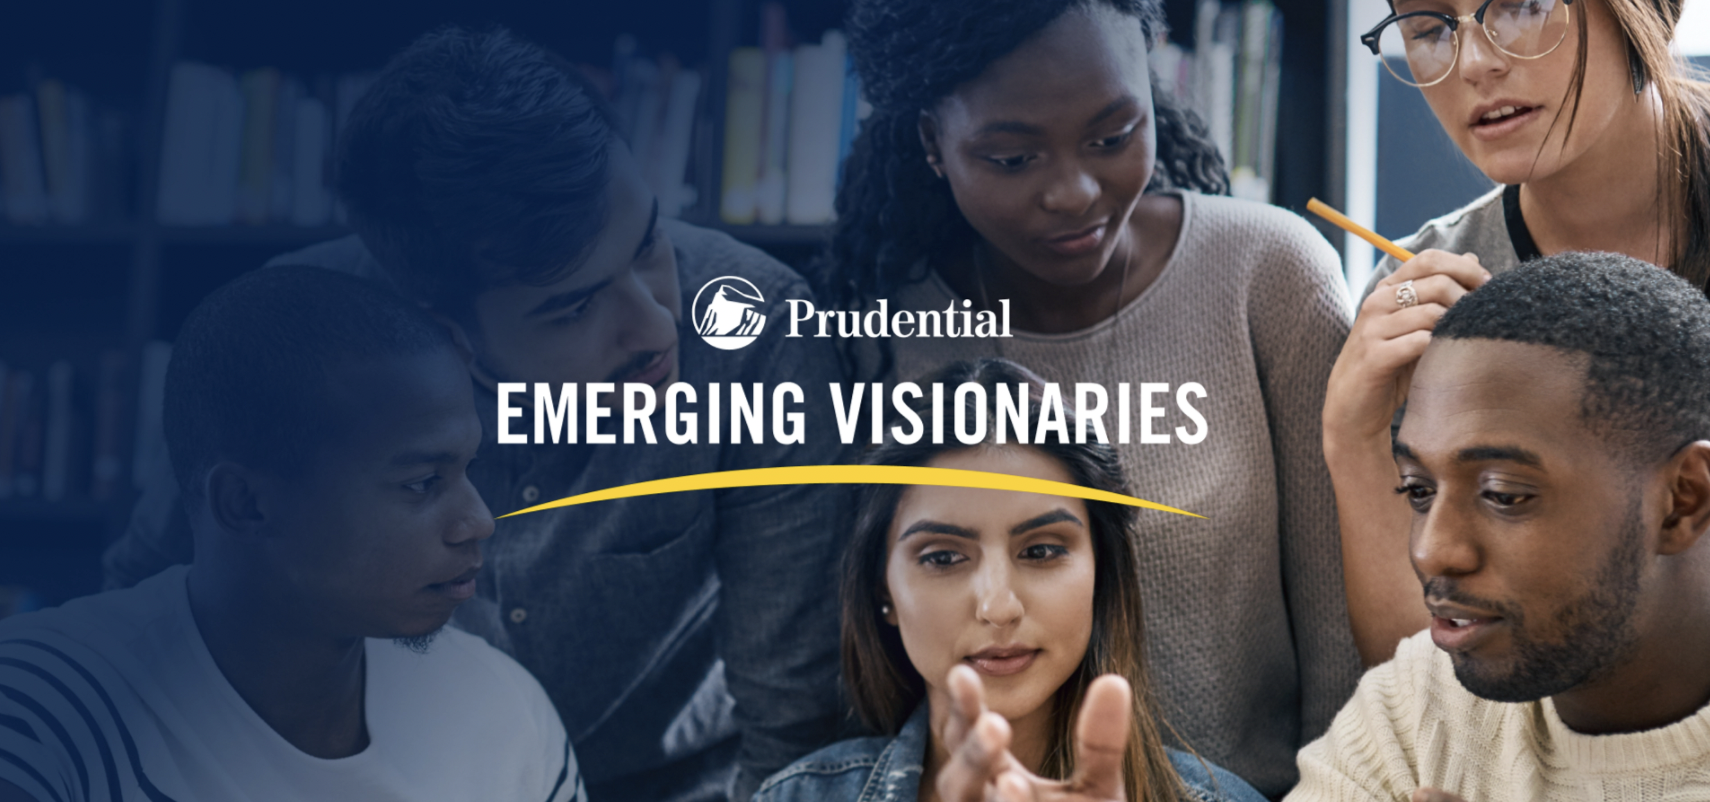 Prudential Emerging Visionaries picture banner